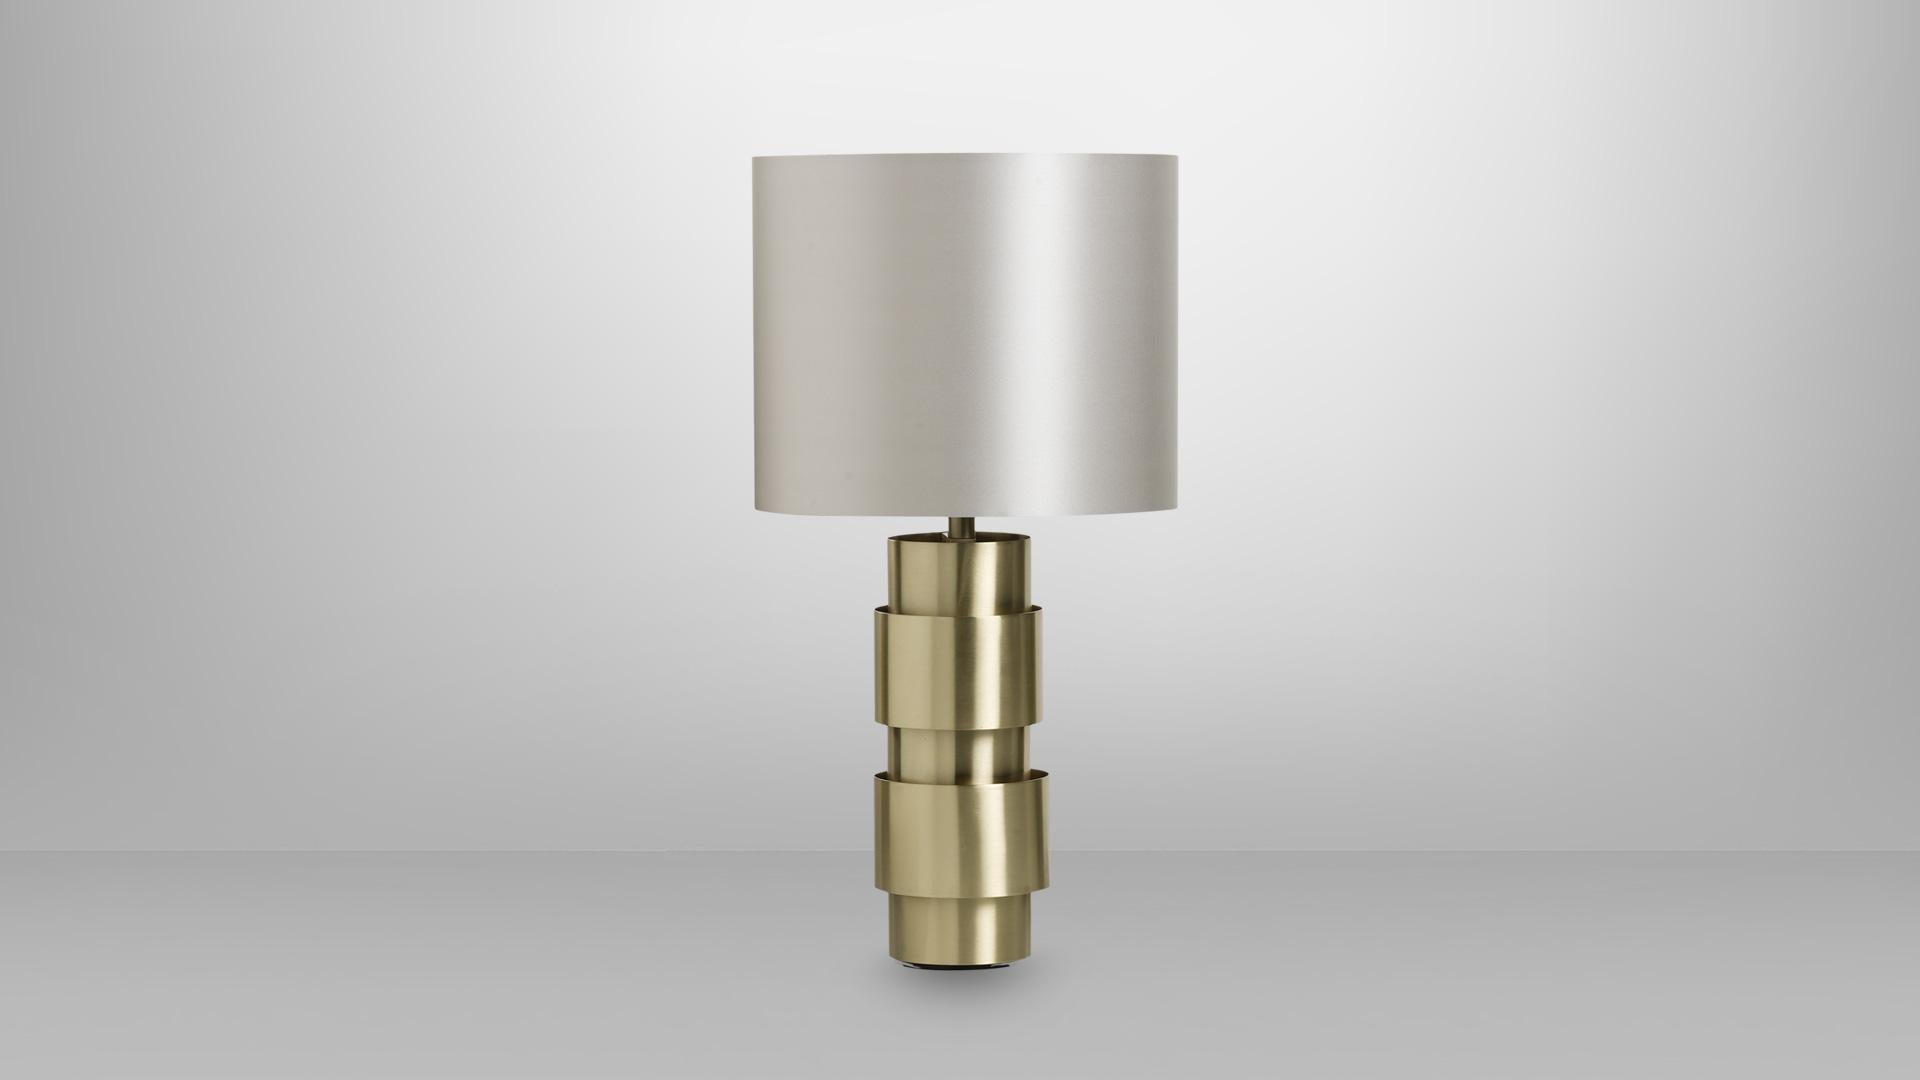 Ring table lamp by CTO Lighting.
Materials: bronze base with dove grey silk shade and silk diffuser.
Also available in satin brass base with dove grey silk shade and silk diffuser.
Dimensions: H 64 x W 30 cm.

All our lamps can be wired according to